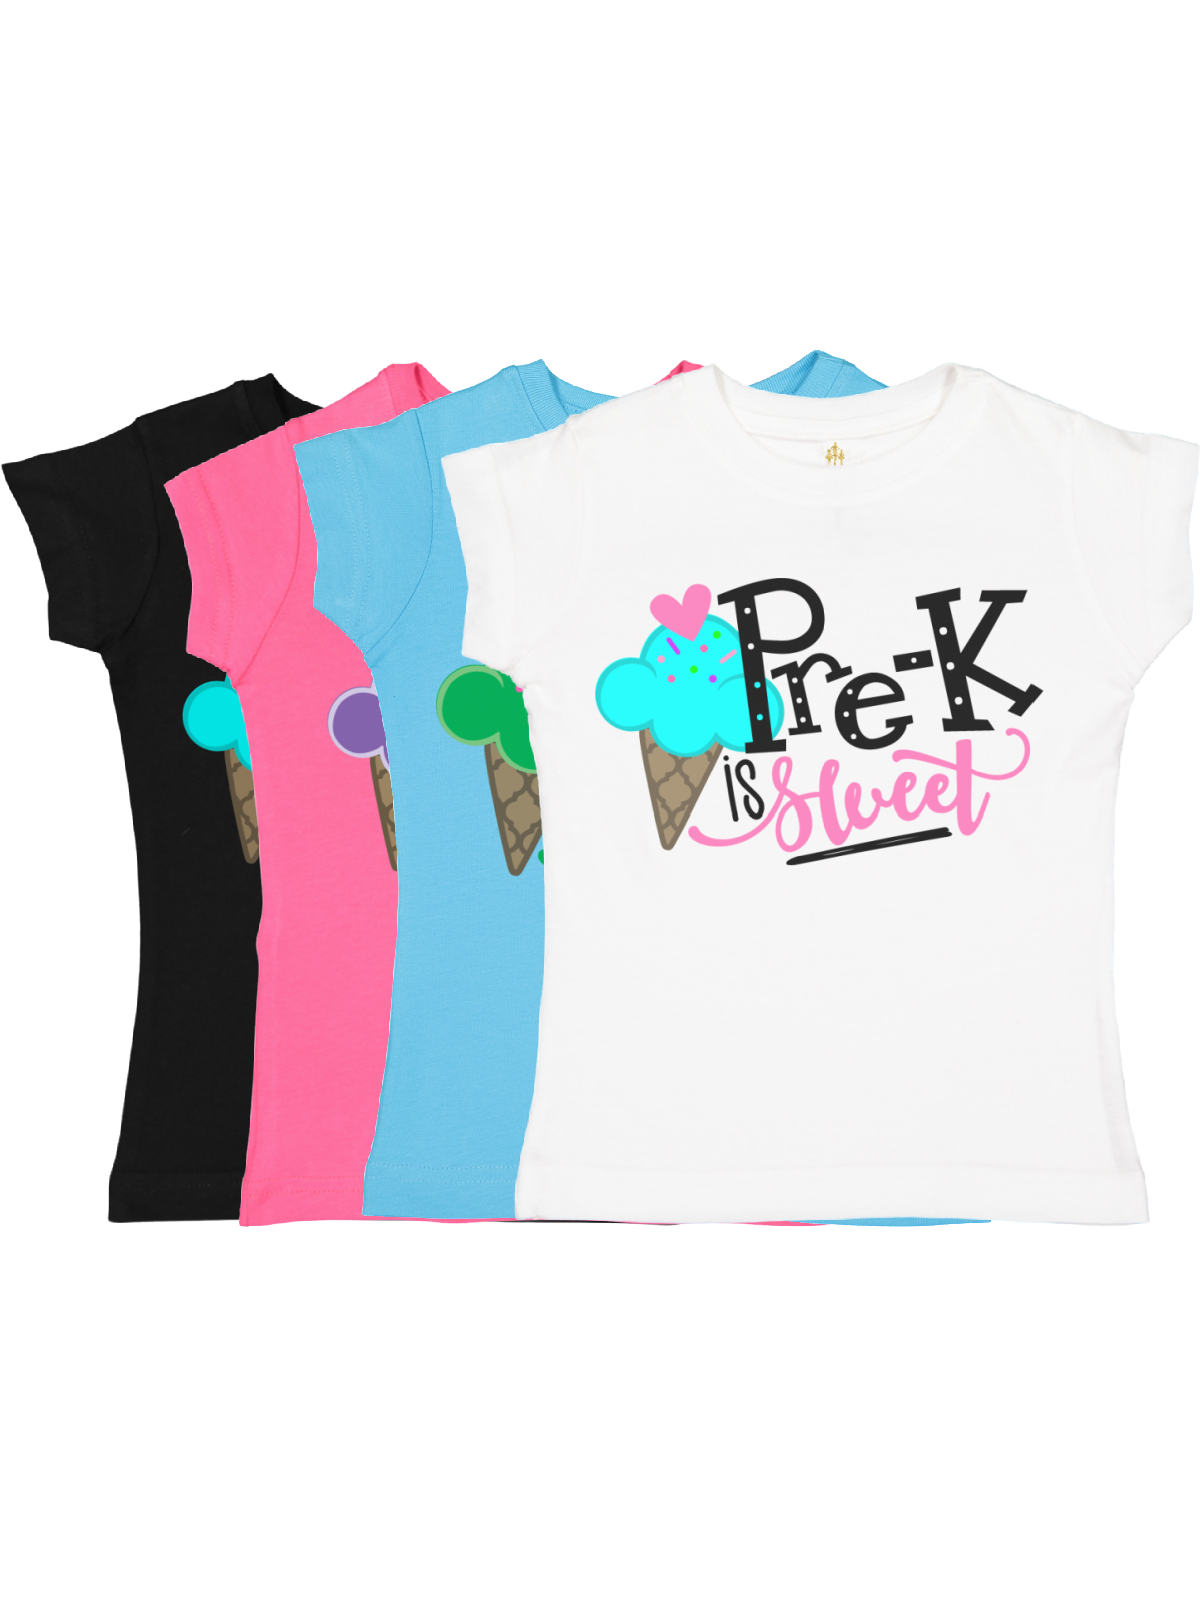 Pre-K is Sweet Girls First Day of School Shirts in White, Blue, Pink, and Black